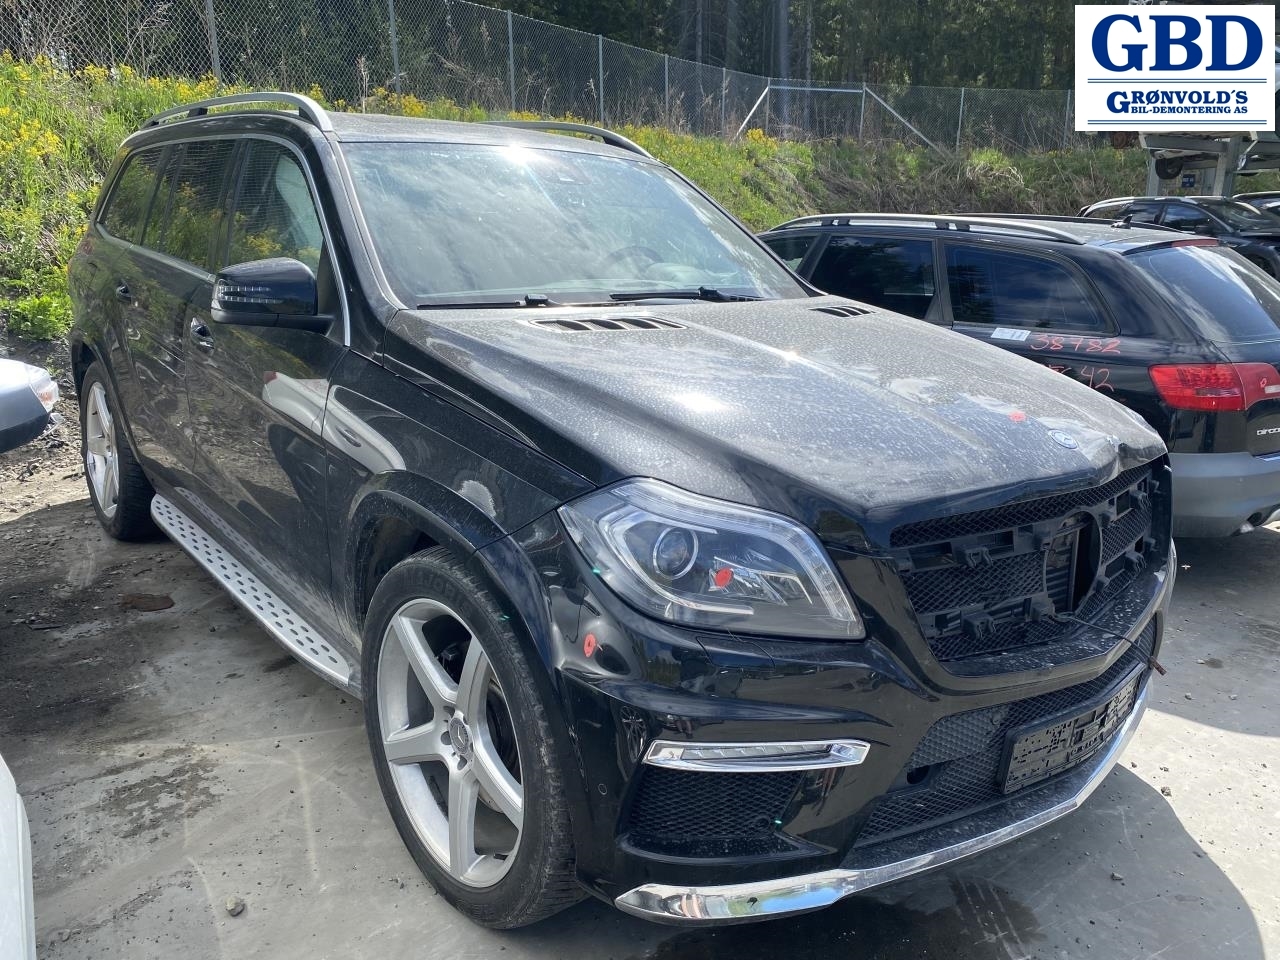 Mercedes GL, 2012-2016 (X166, Fase 1) parts car, Engine code: OM642.826  , Gearbox code: A 166 270 54 00